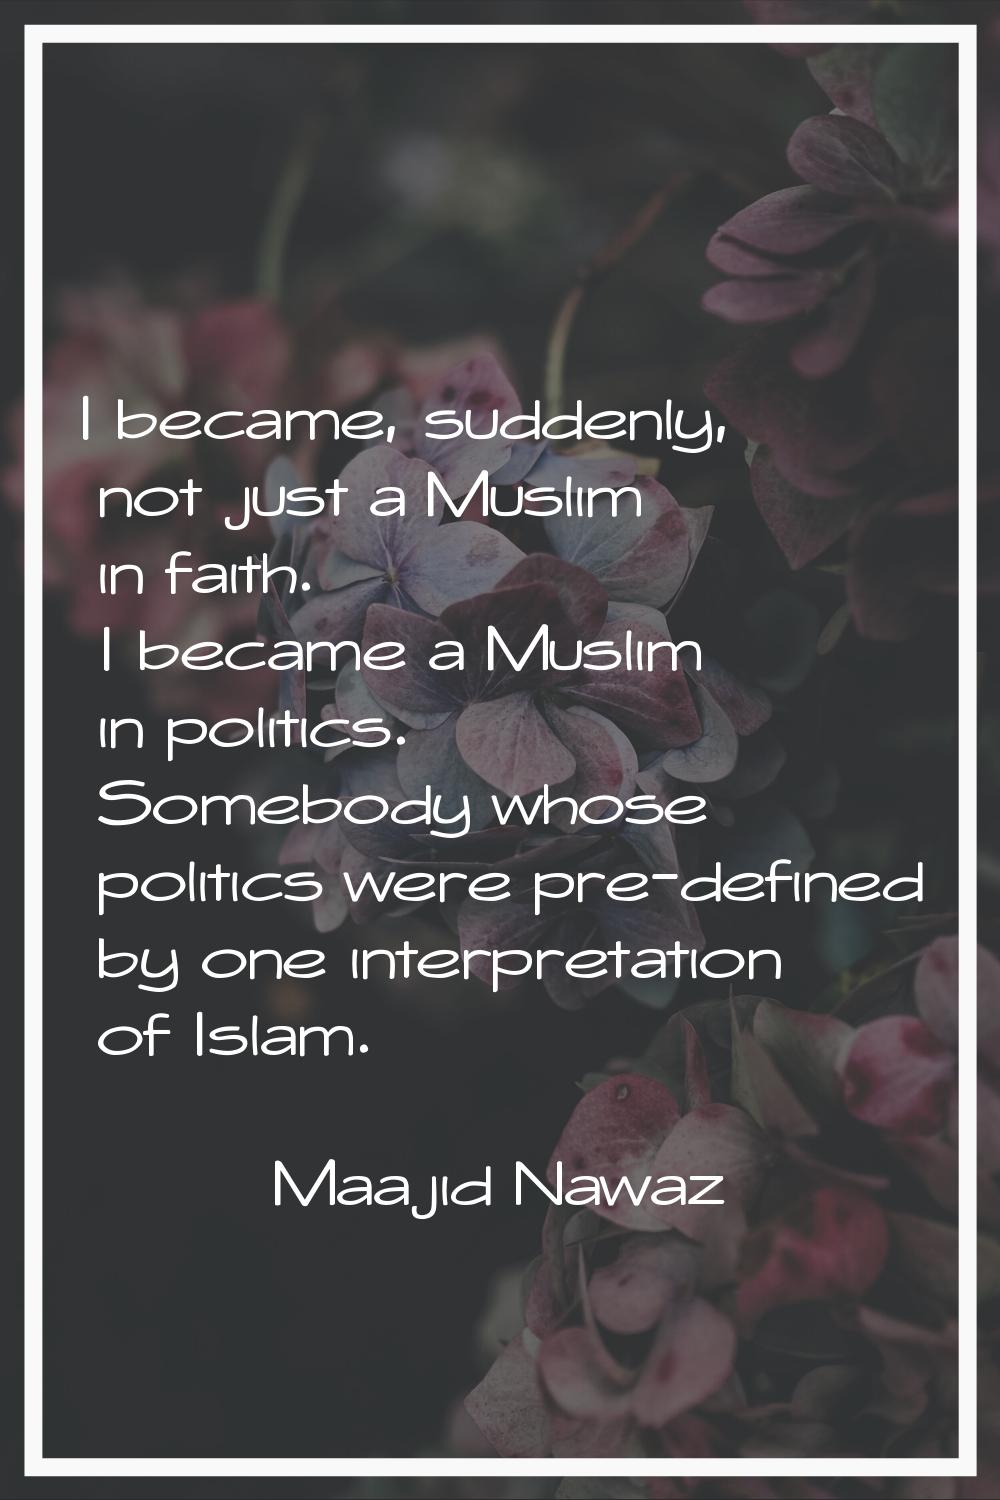 I became, suddenly, not just a Muslim in faith. I became a Muslim in politics. Somebody whose polit